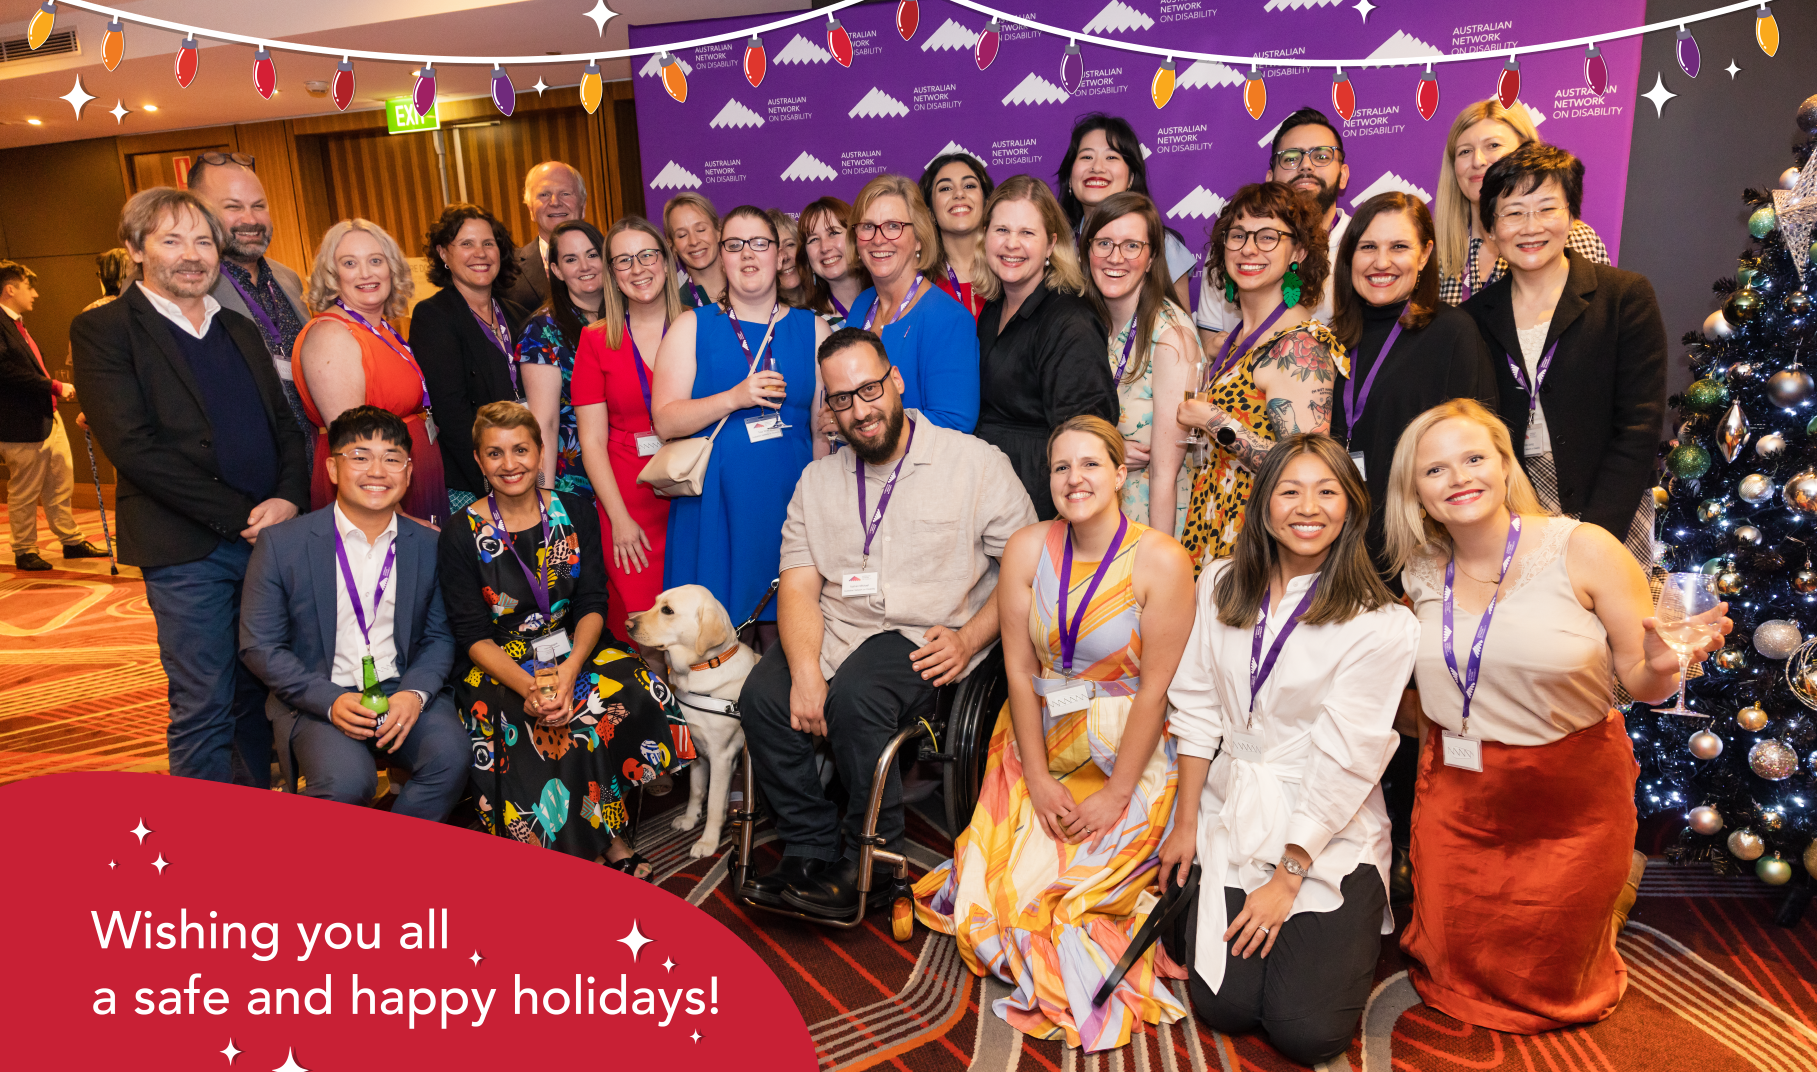 Australian Network on Disability team smiling with text 'Wishing you all a safe and happy holidays!'